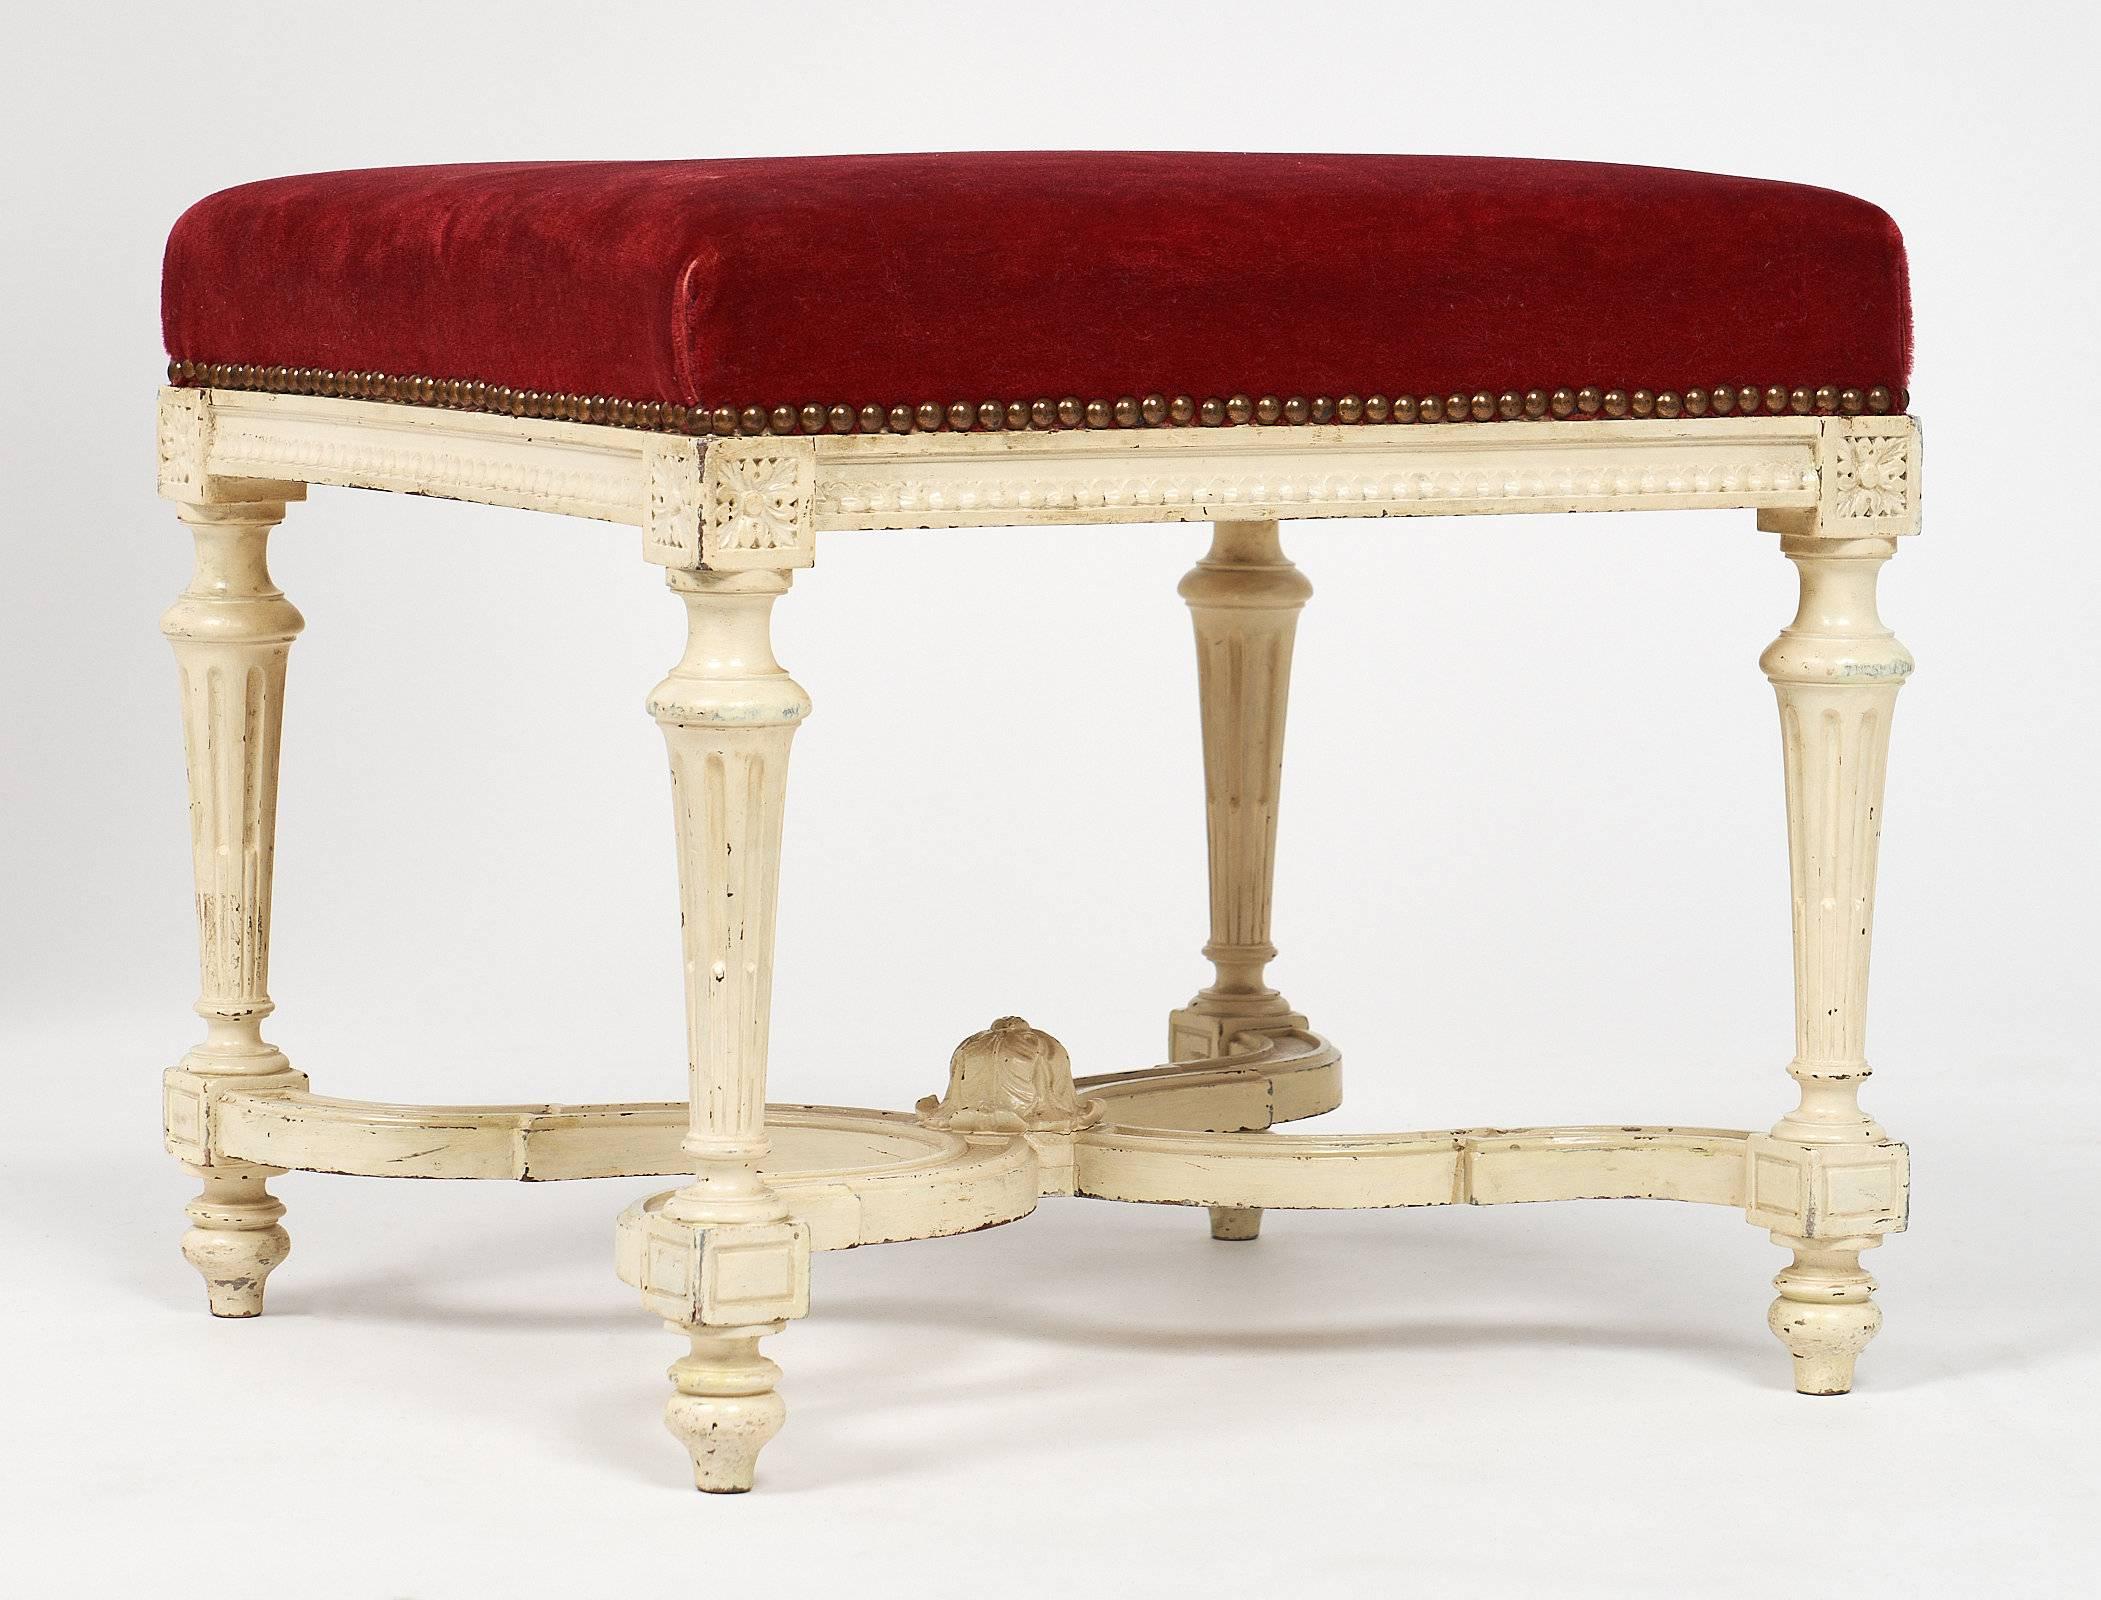 Fine French antique Louis XVI style bench with hand-carved, refined details. It features four tapered legs, an X-stretcher and the original red velvet upholstery. The paint is original and in good condition.